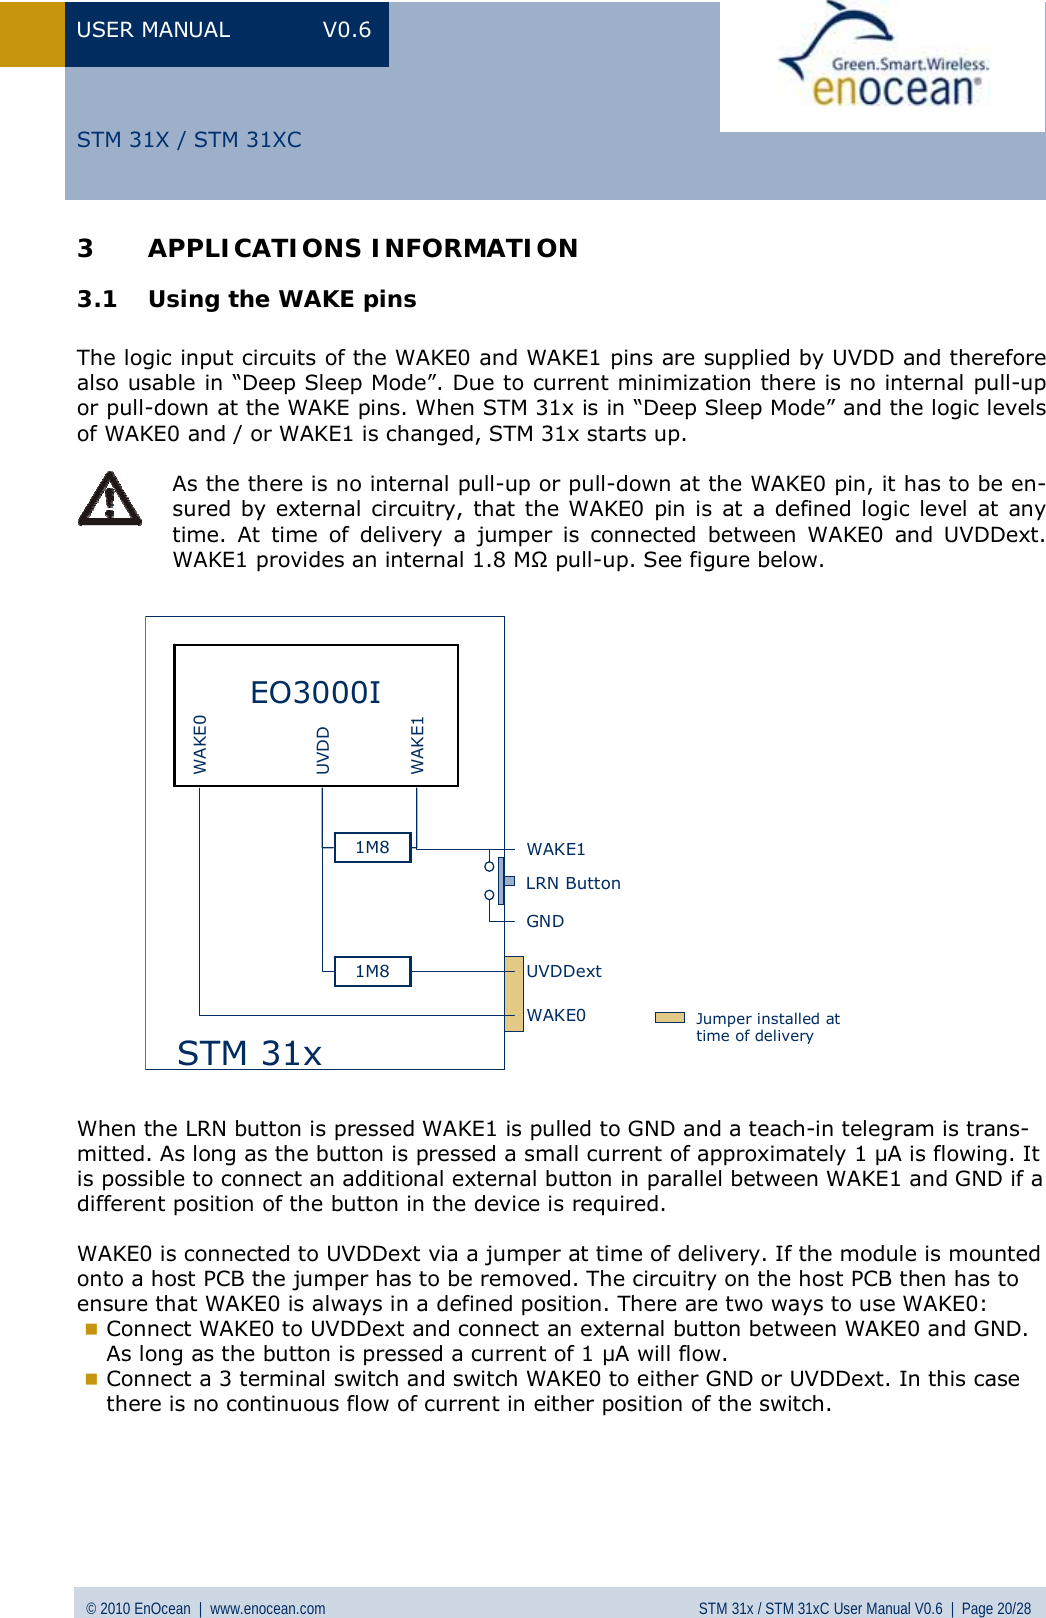 USER MANUAL V0.6 © 2010 EnOcean  |  www.enocean.com STM 31x / STM 31xC User Manual V0.6  |  Page 20/28  STM 31X / STM 31XC3 APPLICATIONS INFORMATION 3.1 Using the WAKE pins   The logic input circuits of the WAKE0 and WAKE1 pins are supplied by UVDD and therefore also usable in “Deep Sleep Mode”. Due to current minimization there is no internal pull-up or pull-down at the WAKE pins. When STM 31x is in “Deep Sleep Mode” and the logic levels of WAKE0 and / or WAKE1 is changed, STM 31x starts up.   As the there is no internal pull-up or pull-down at the WAKE0 pin, it has to be en-sured by external circuitry, that the WAKE0 pin is at a defined logic level at any time. At time of delivery a jumper is connected between WAKE0 and UVDDext. WAKE1 provides an internal 1.8 MΩ pull-up. See figure below.           When the LRN button is pressed WAKE1 is pulled to GND and a teach-in telegram is trans-mitted. As long as the button is pressed a small current of approximately 1 µA is flowing. It is possible to connect an additional external button in parallel between WAKE1 and GND if a different position of the button in the device is required.  WAKE0 is connected to UVDDext via a jumper at time of delivery. If the module is mounted onto a host PCB the jumper has to be removed. The circuitry on the host PCB then has to ensure that WAKE0 is always in a defined position. There are two ways to use WAKE0:   Connect WAKE0 to UVDDext and connect an external button between WAKE0 and GND. As long as the button is pressed a current of 1 µA will flow.  Connect a 3 terminal switch and switch WAKE0 to either GND or UVDDext. In this case there is no continuous flow of current in either position of the switch.       EO3000IWAKE0WAKE1UVDDUVDDextSTM 31xWAKE1WAKE0GND1M81M8LRN ButtonJumper installed at time of delivery